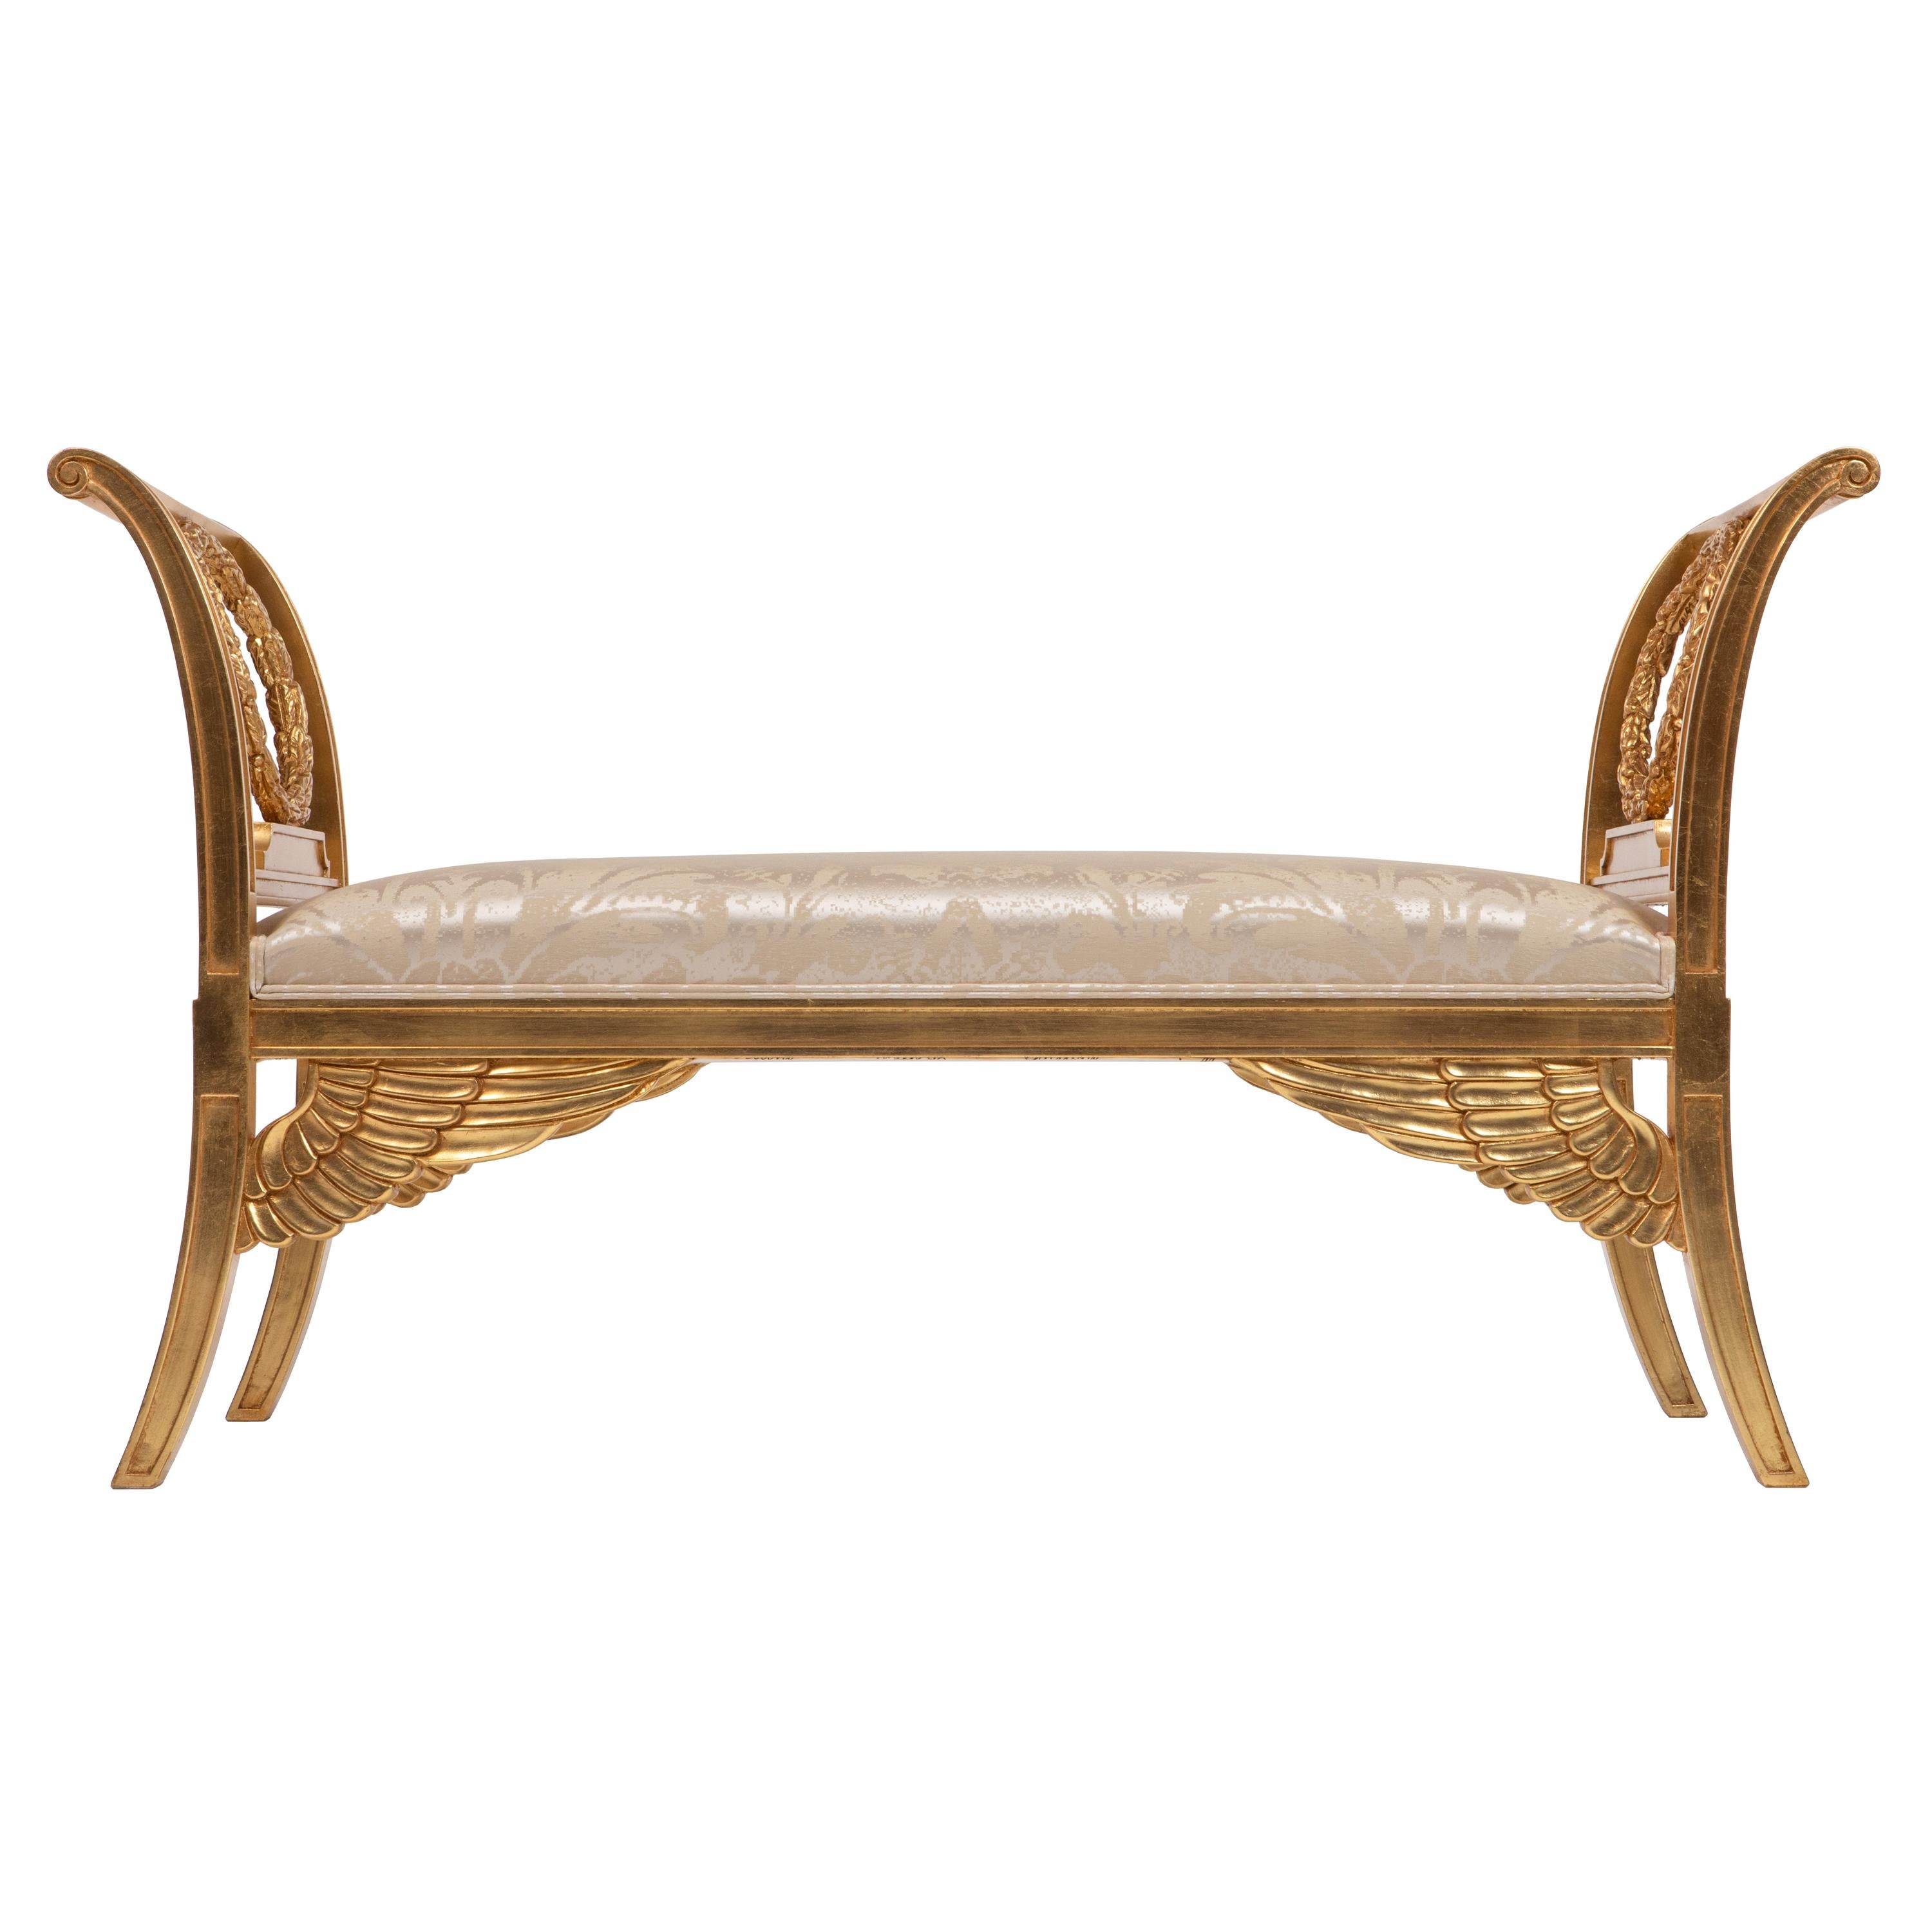 Empire Style Wooden Bench, Gold Leaf Finishing, Handcarved and Made in Italy